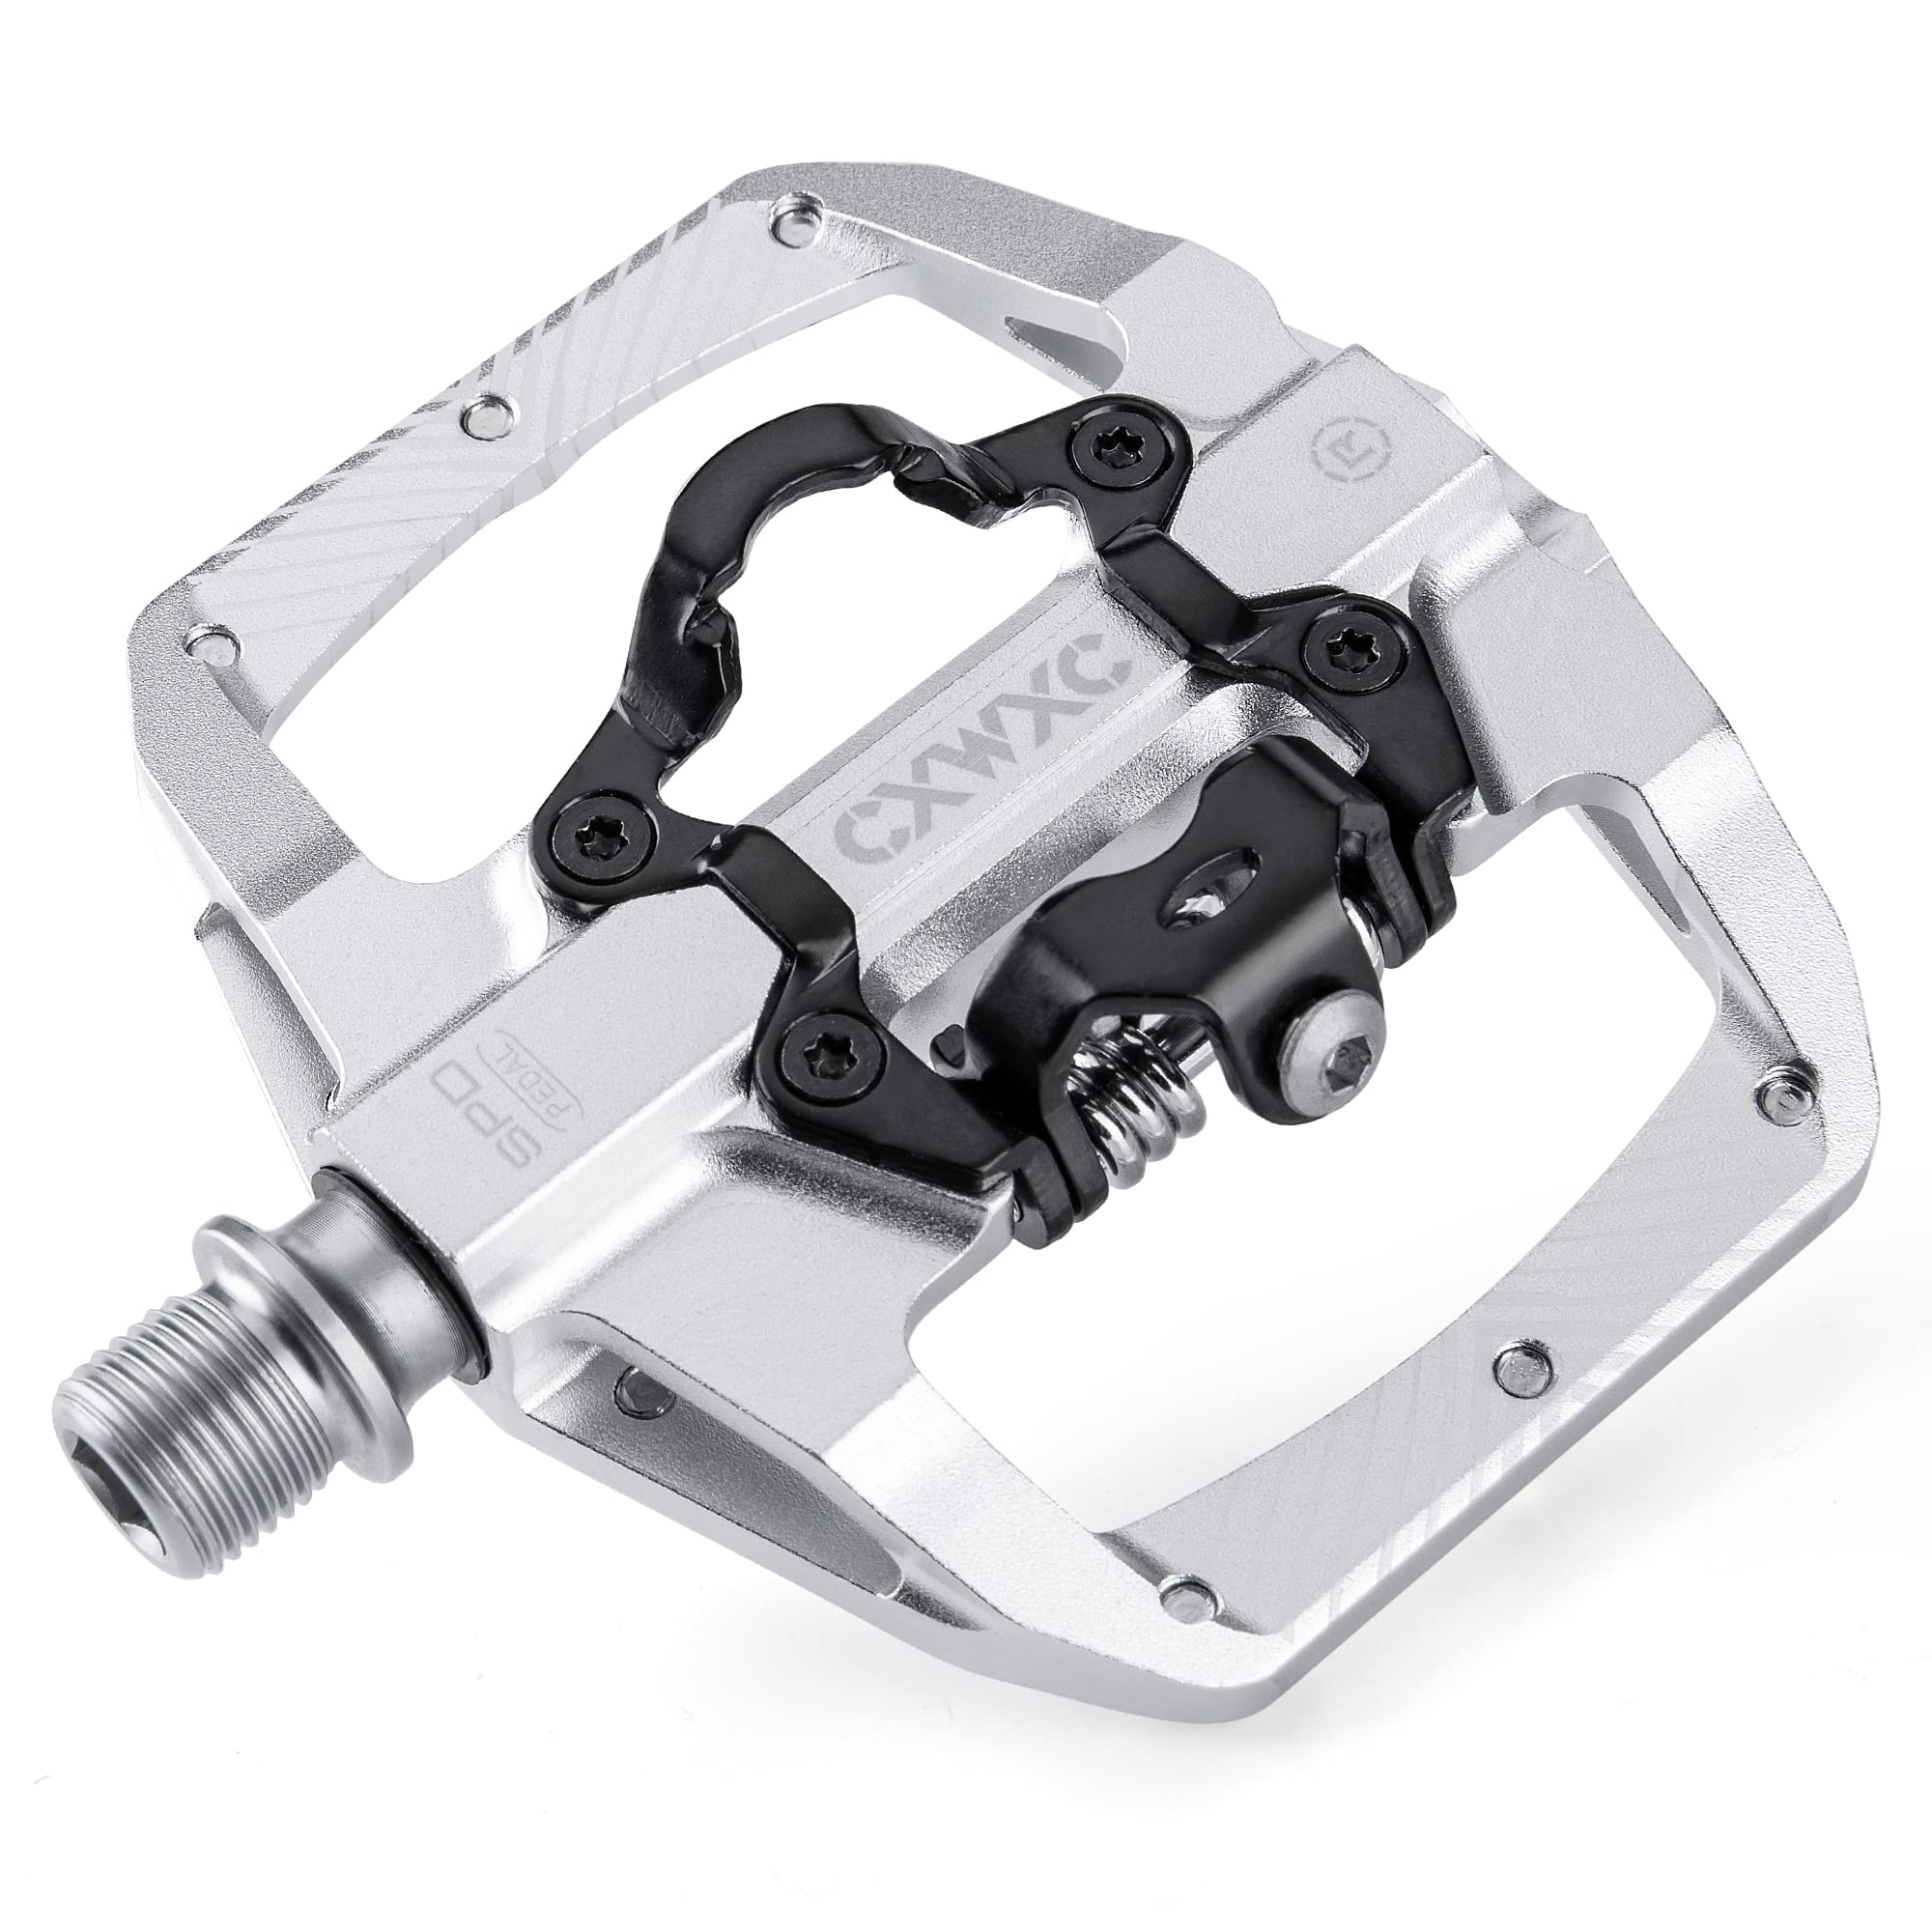 Mountain Bike Pedals Dual Function - Dual Sided Pedals Plat & SPD Clipless Pedal - 3 Sealed Bearings, 9/16” Bicycle Platform MTB Pedals